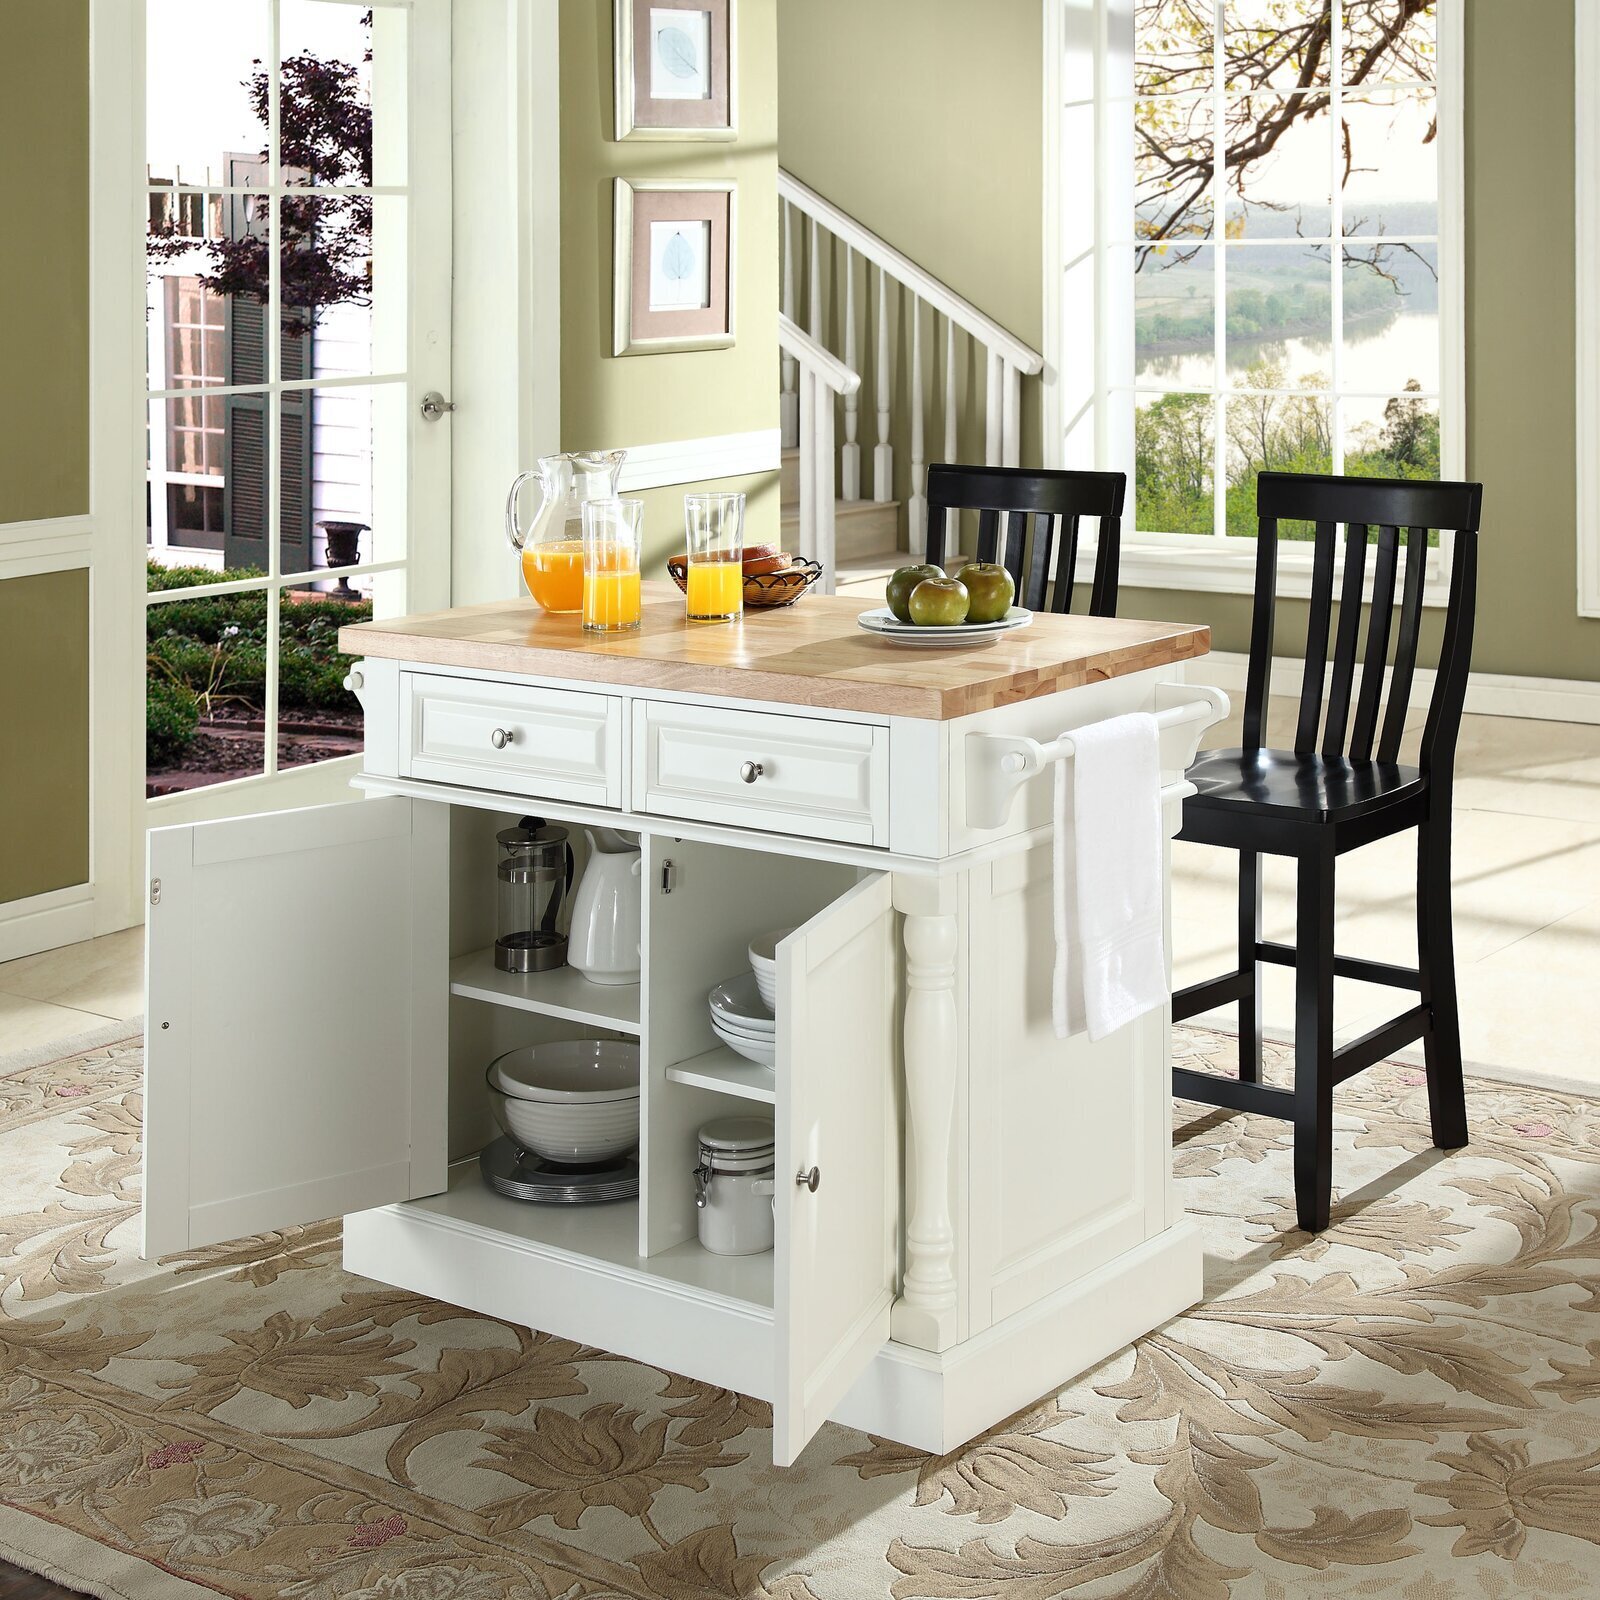 Wide Butcher Block Island With Seating